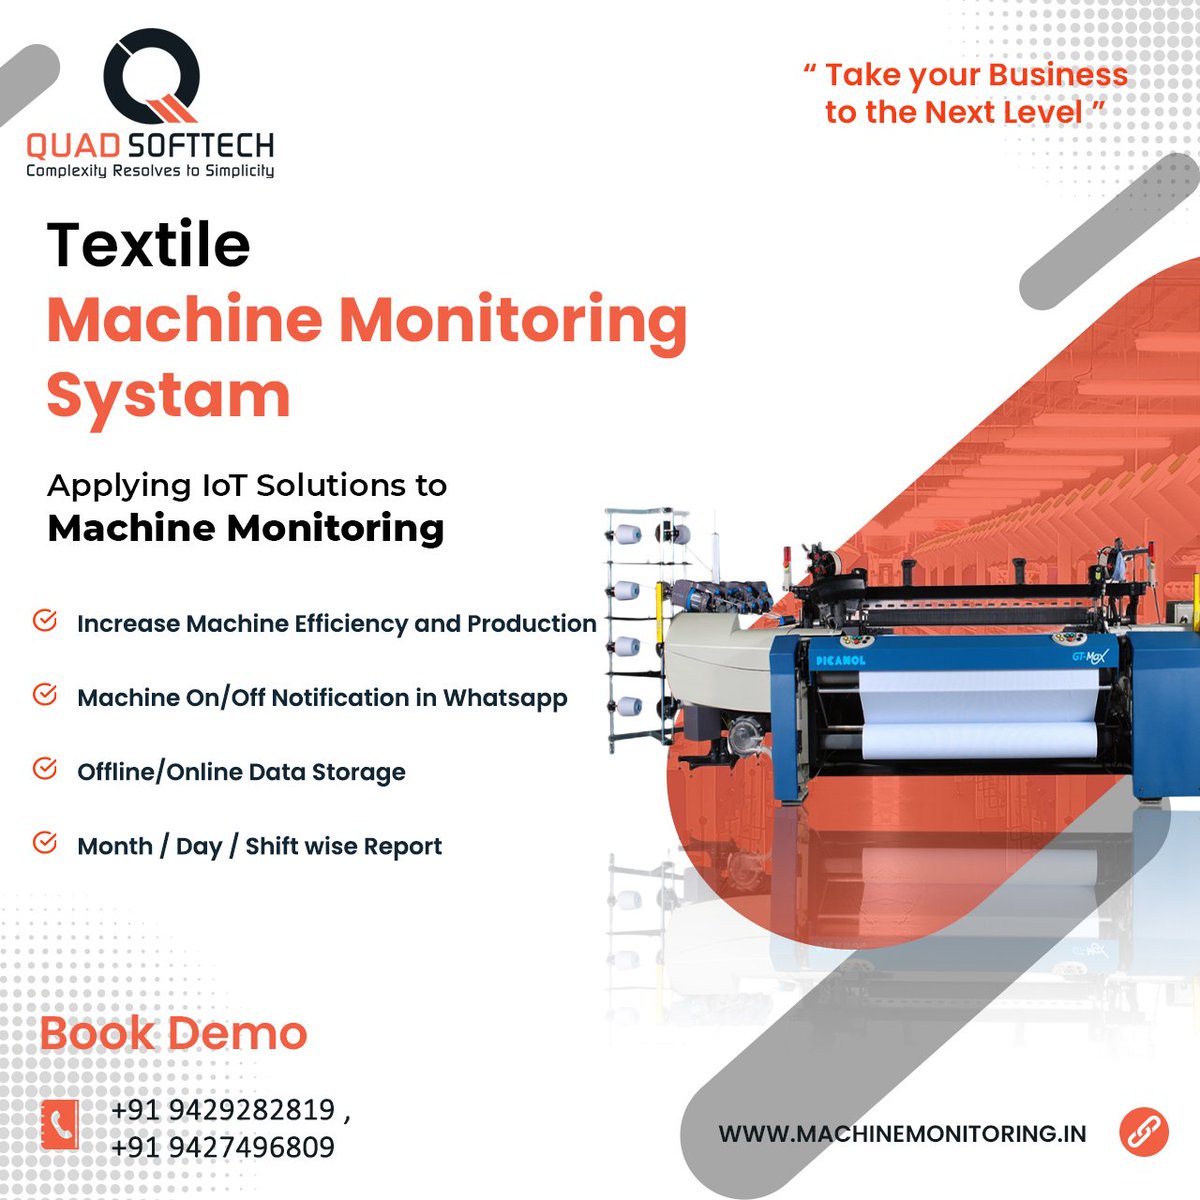 Machine monitoring system. It helps to increase your machine's efficiency and production using our Quad MMS.

#QuadSoftTech #MMS #MachineMonitoring #TextileMonitoring #IndustrialIoT #MachineMonitoringSystem #MMSMachineMonitoringSystem #MachineMonitoringSystemsLTD #India